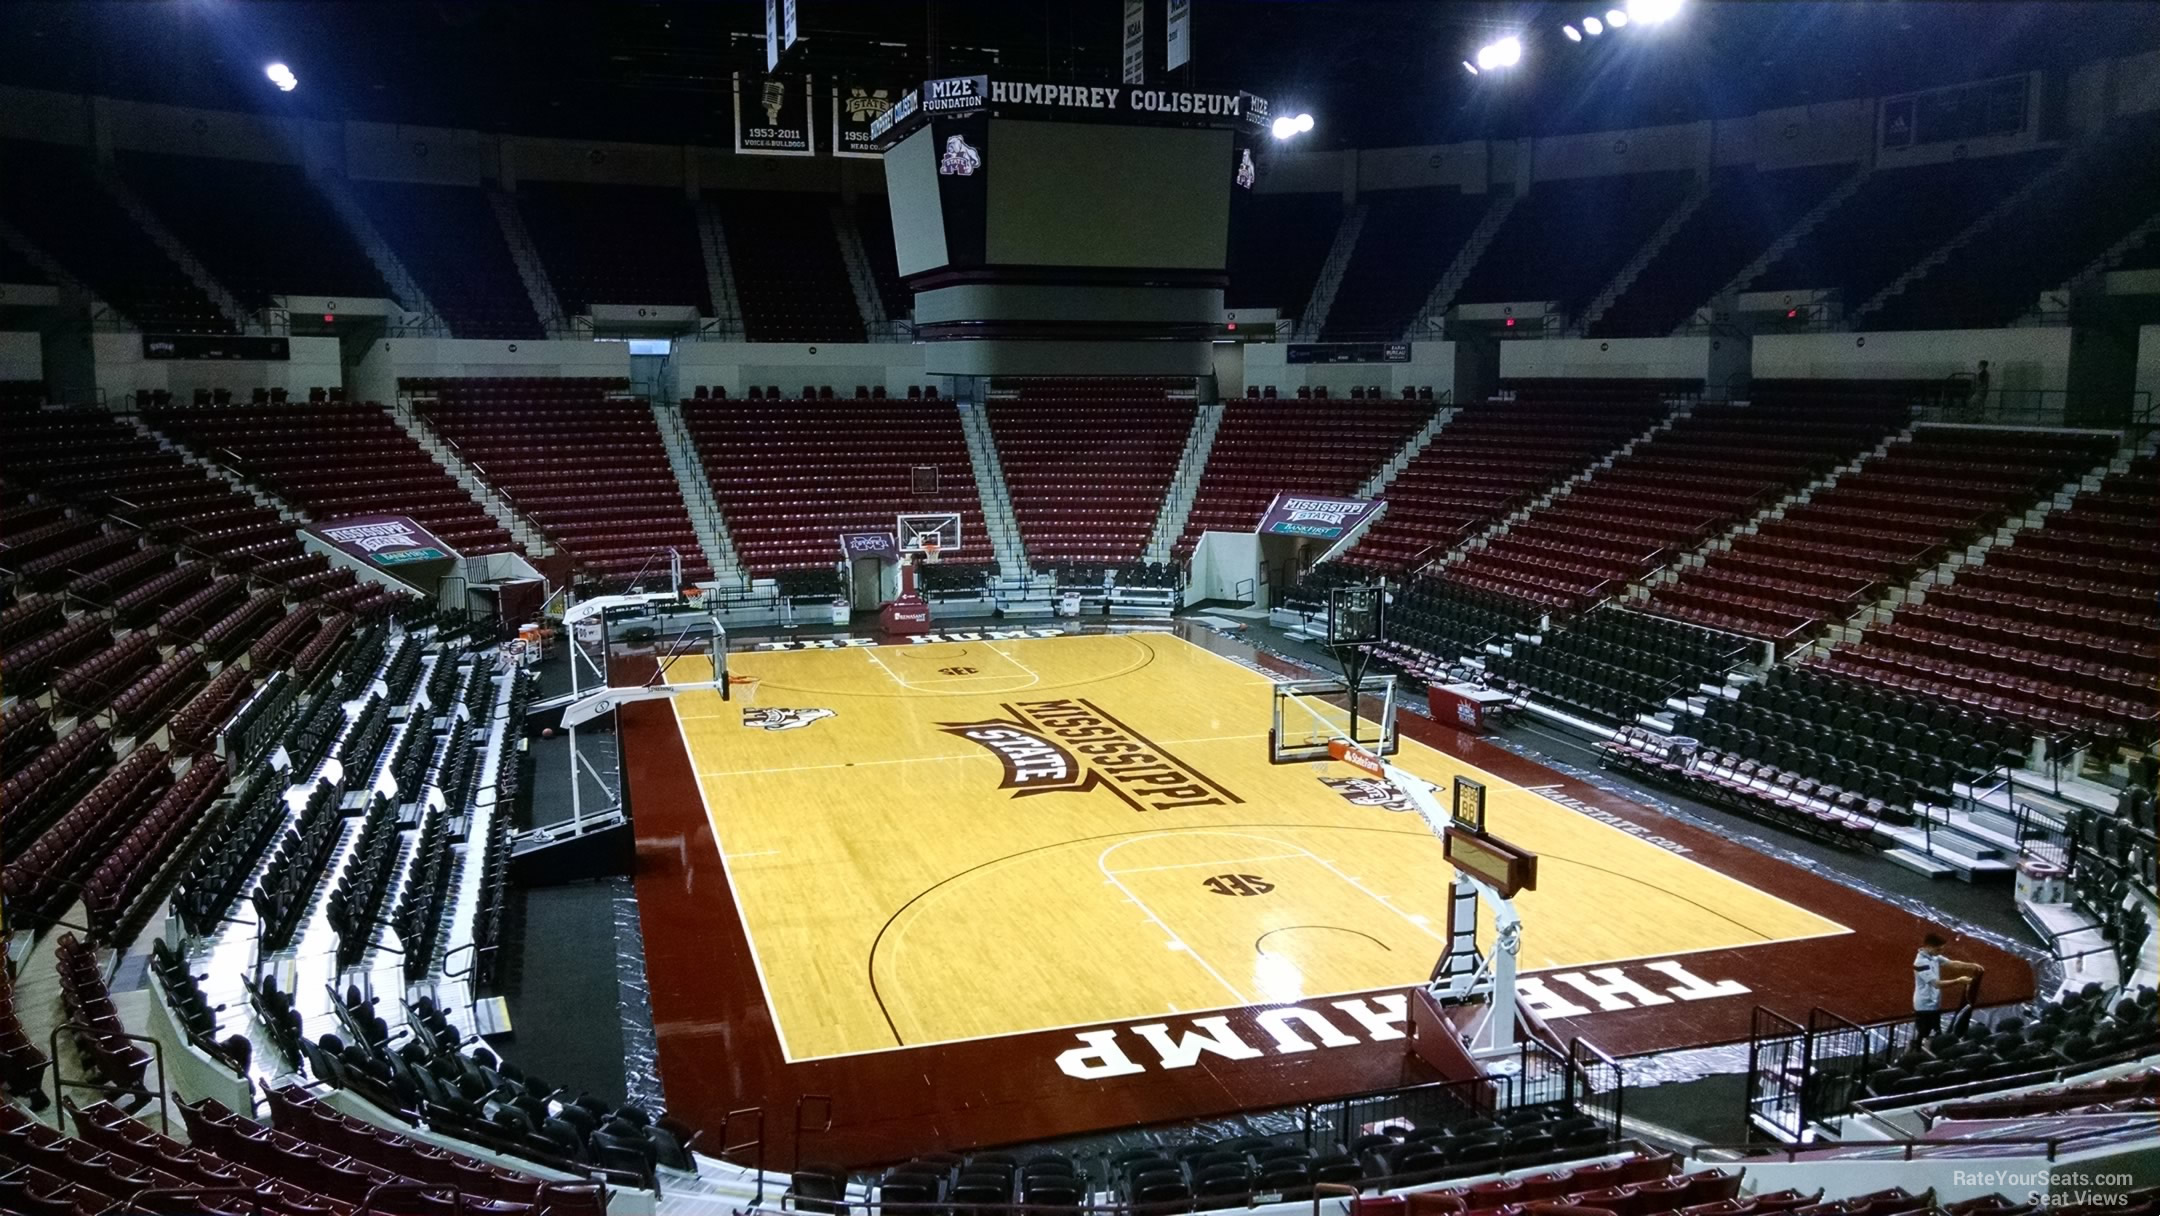 section 102, row 15 seat view  - humphrey coliseum